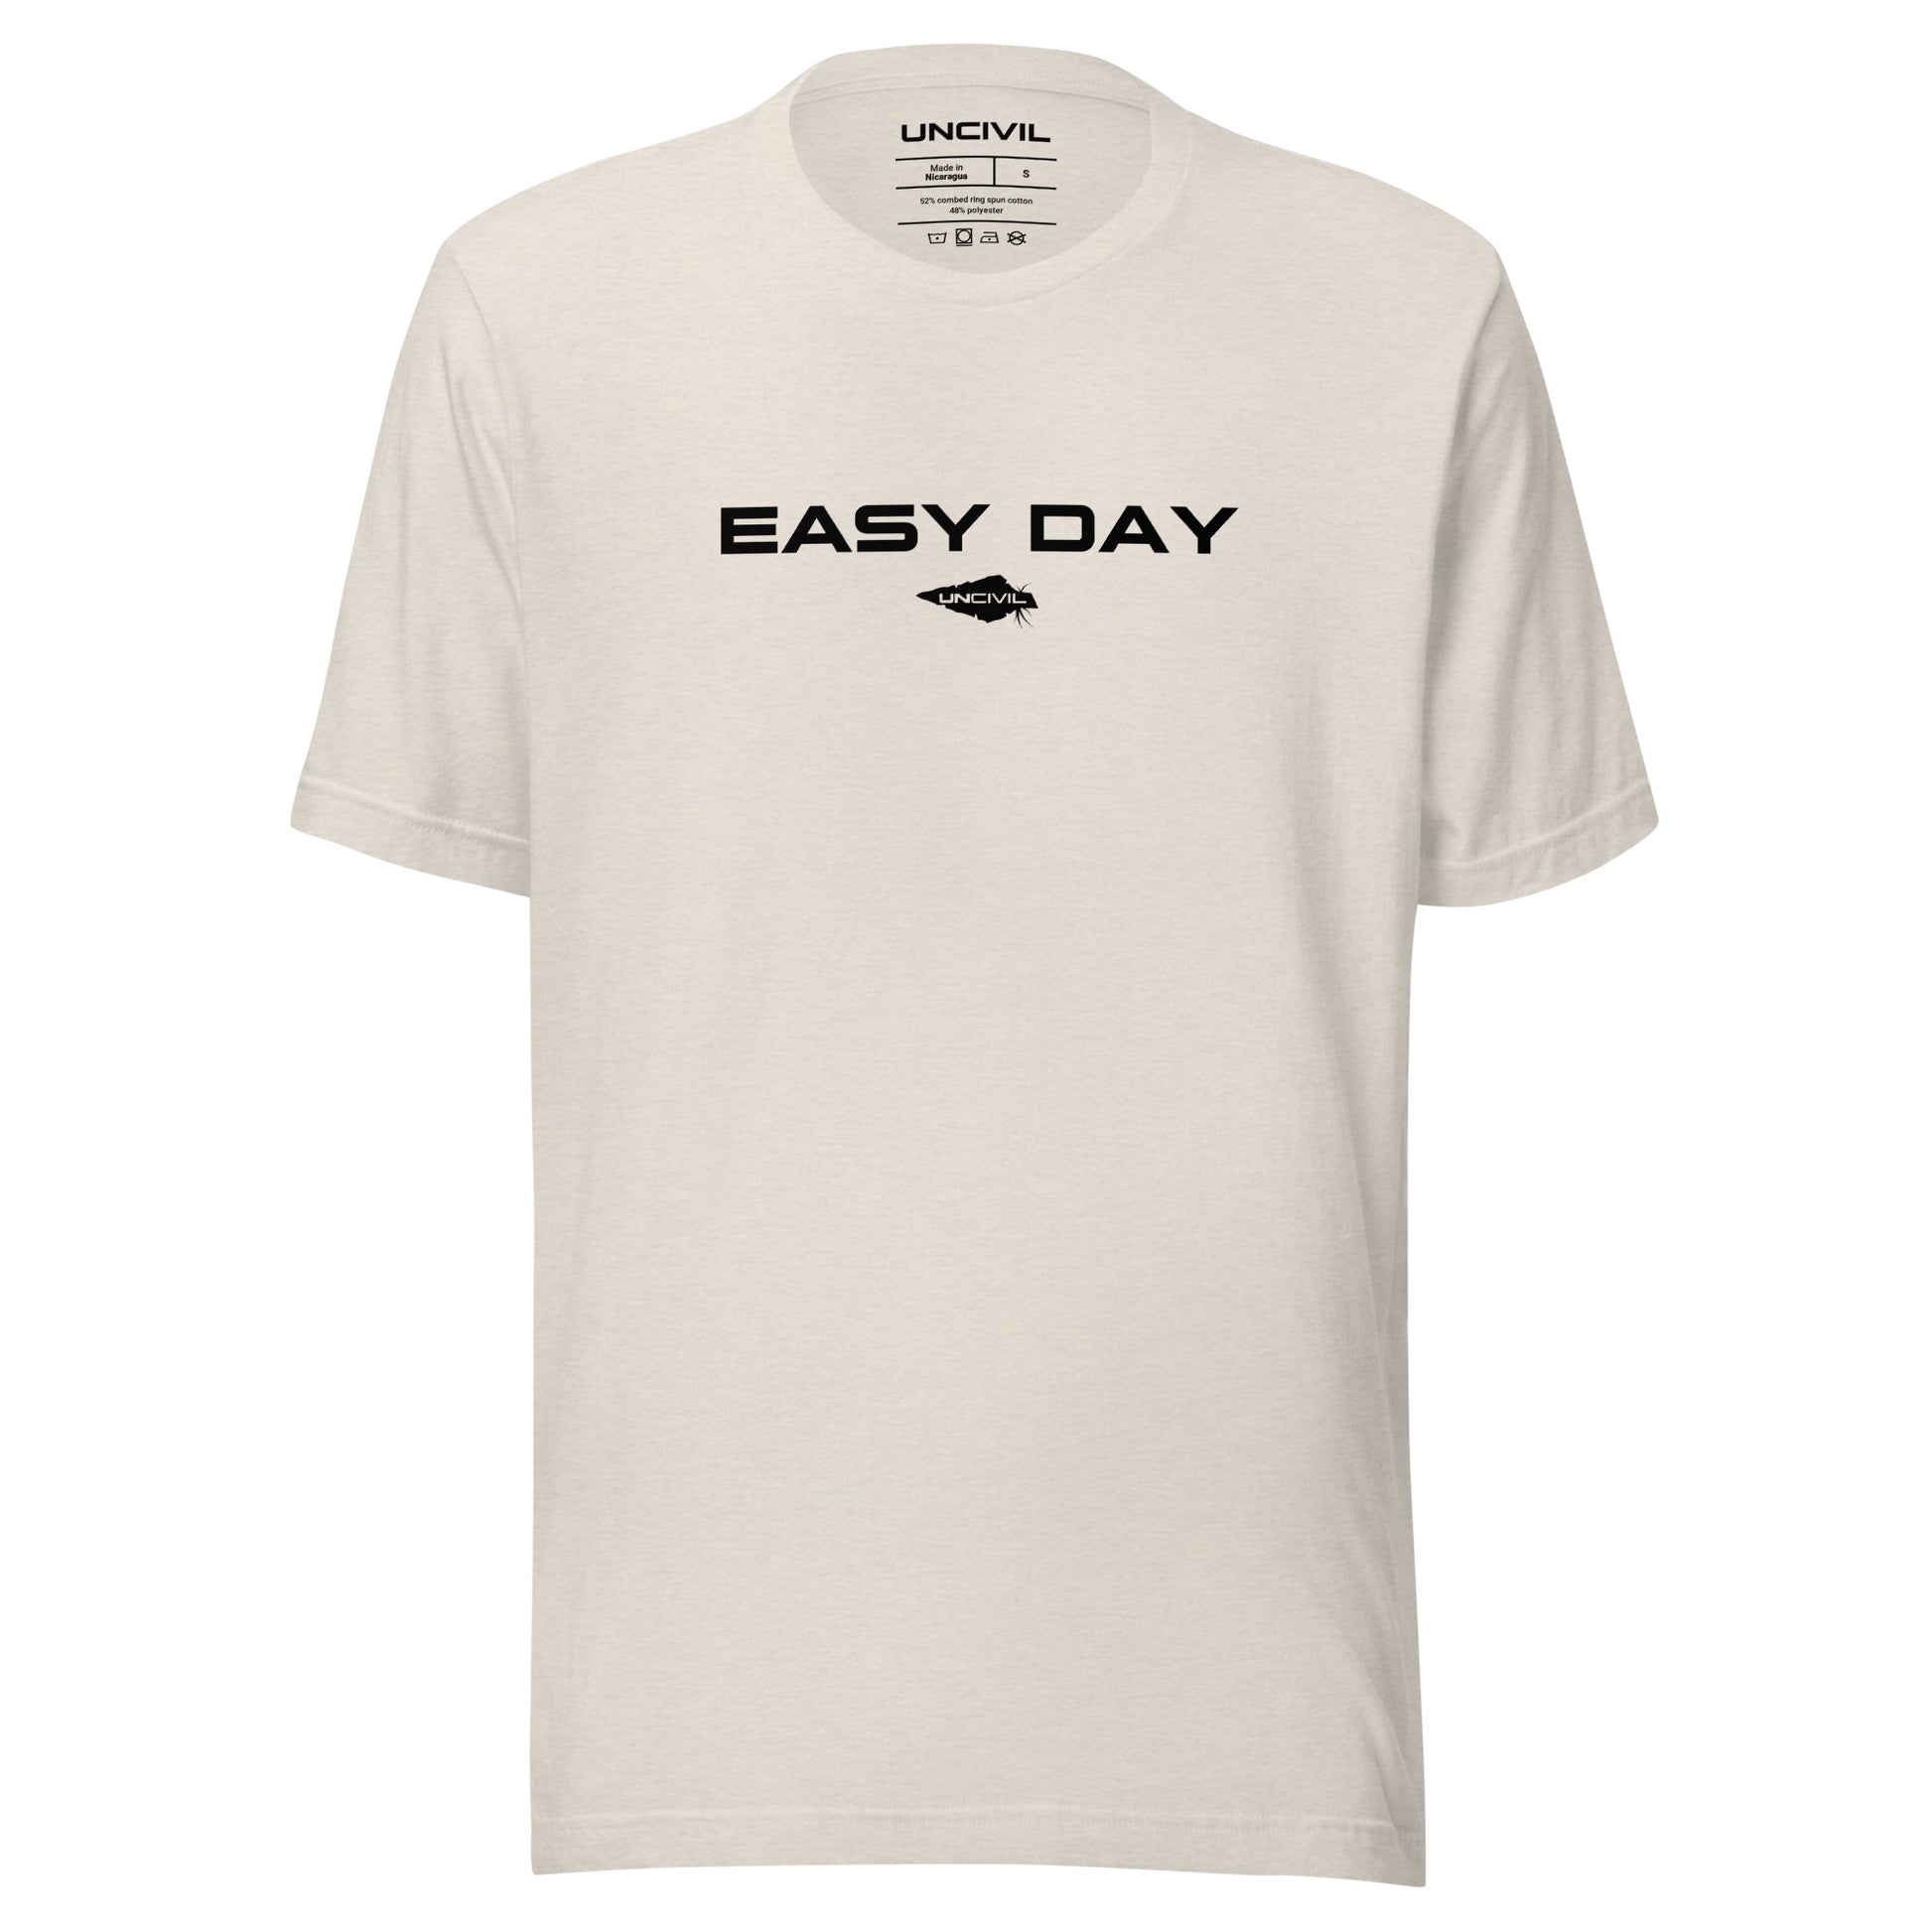 Easy Day UNCIVIL Tee, inspired by the Navy Seals phrase "Easy Day". Heather Dust men's shirt.